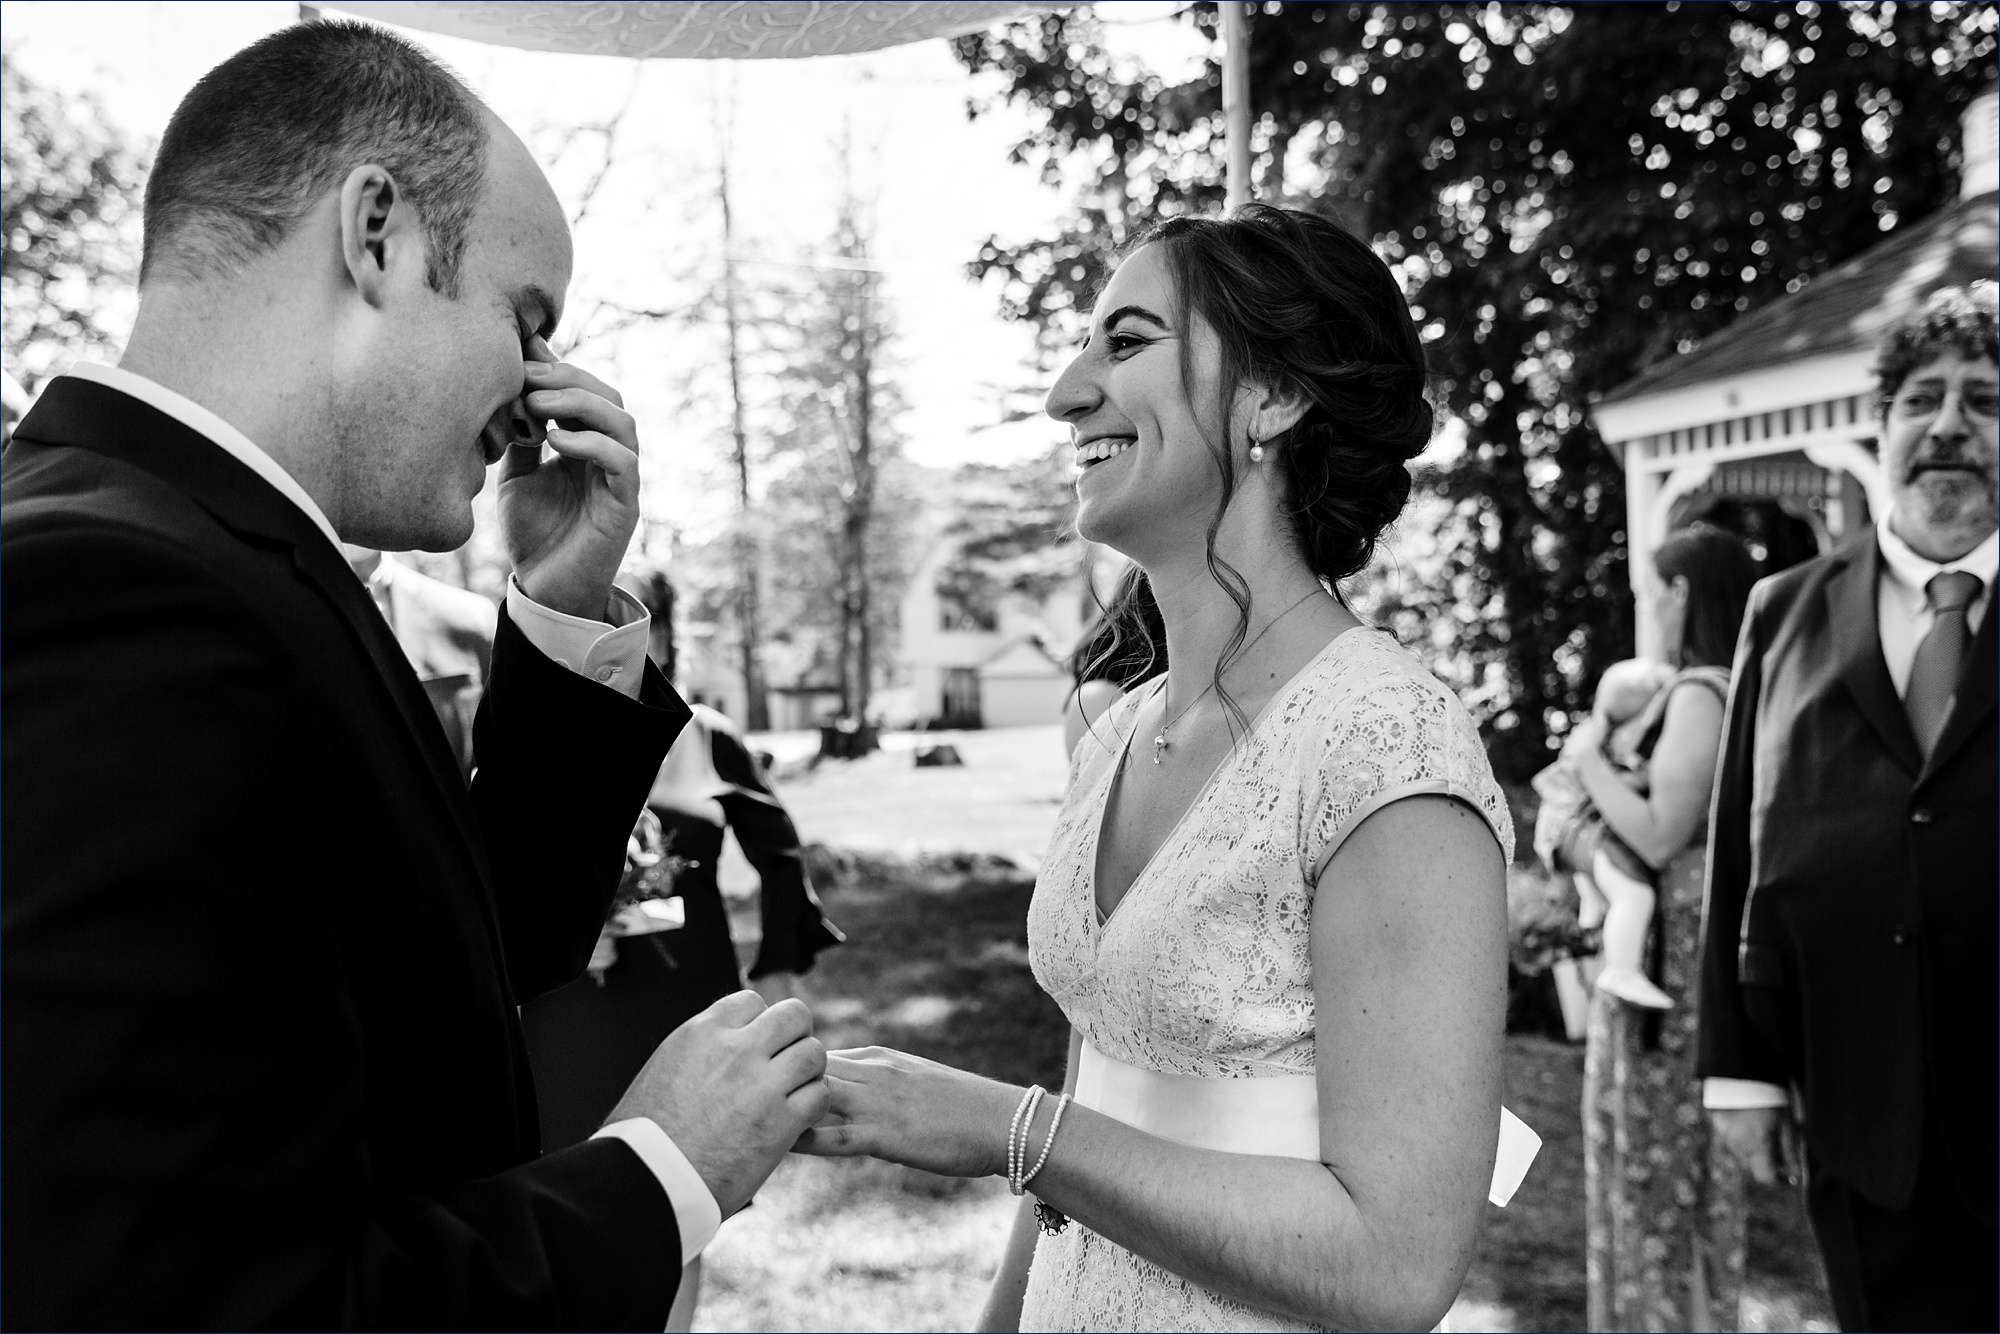 The groom tears up as he places the ring on the bride during their Jackson NH elopement